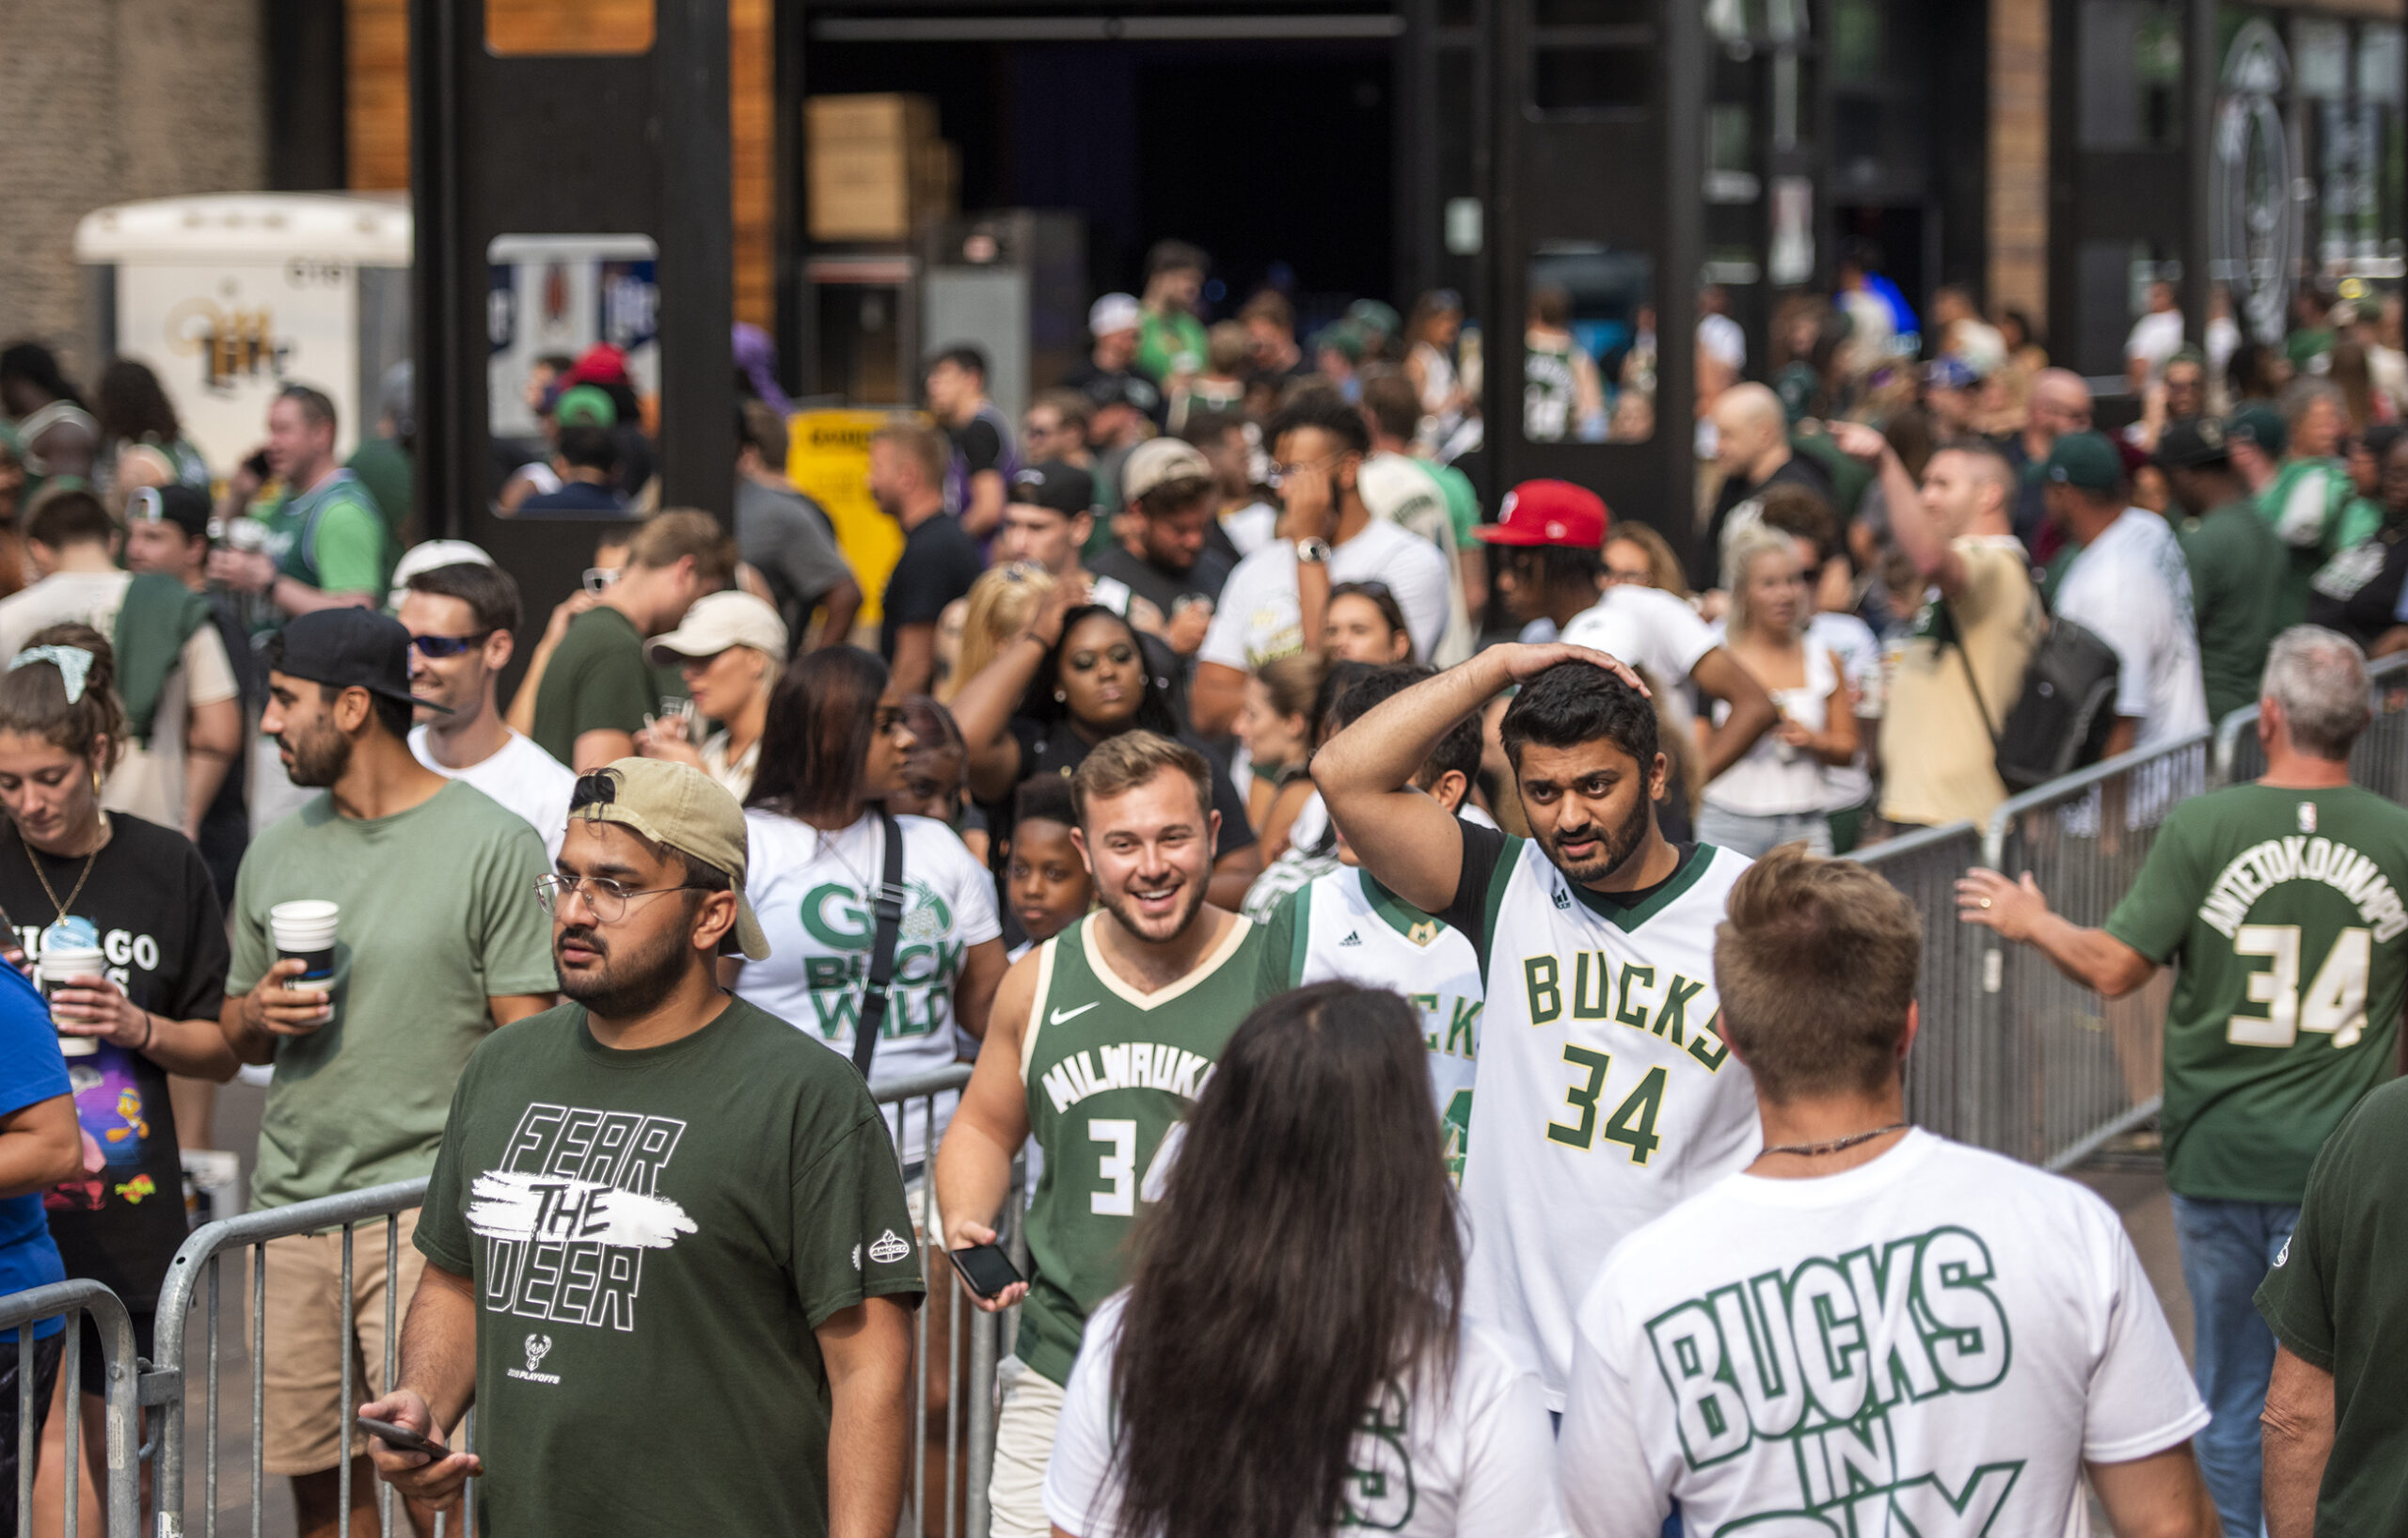 A crowd in Bucks t-shirts and jerseys gathers in the Deer District.